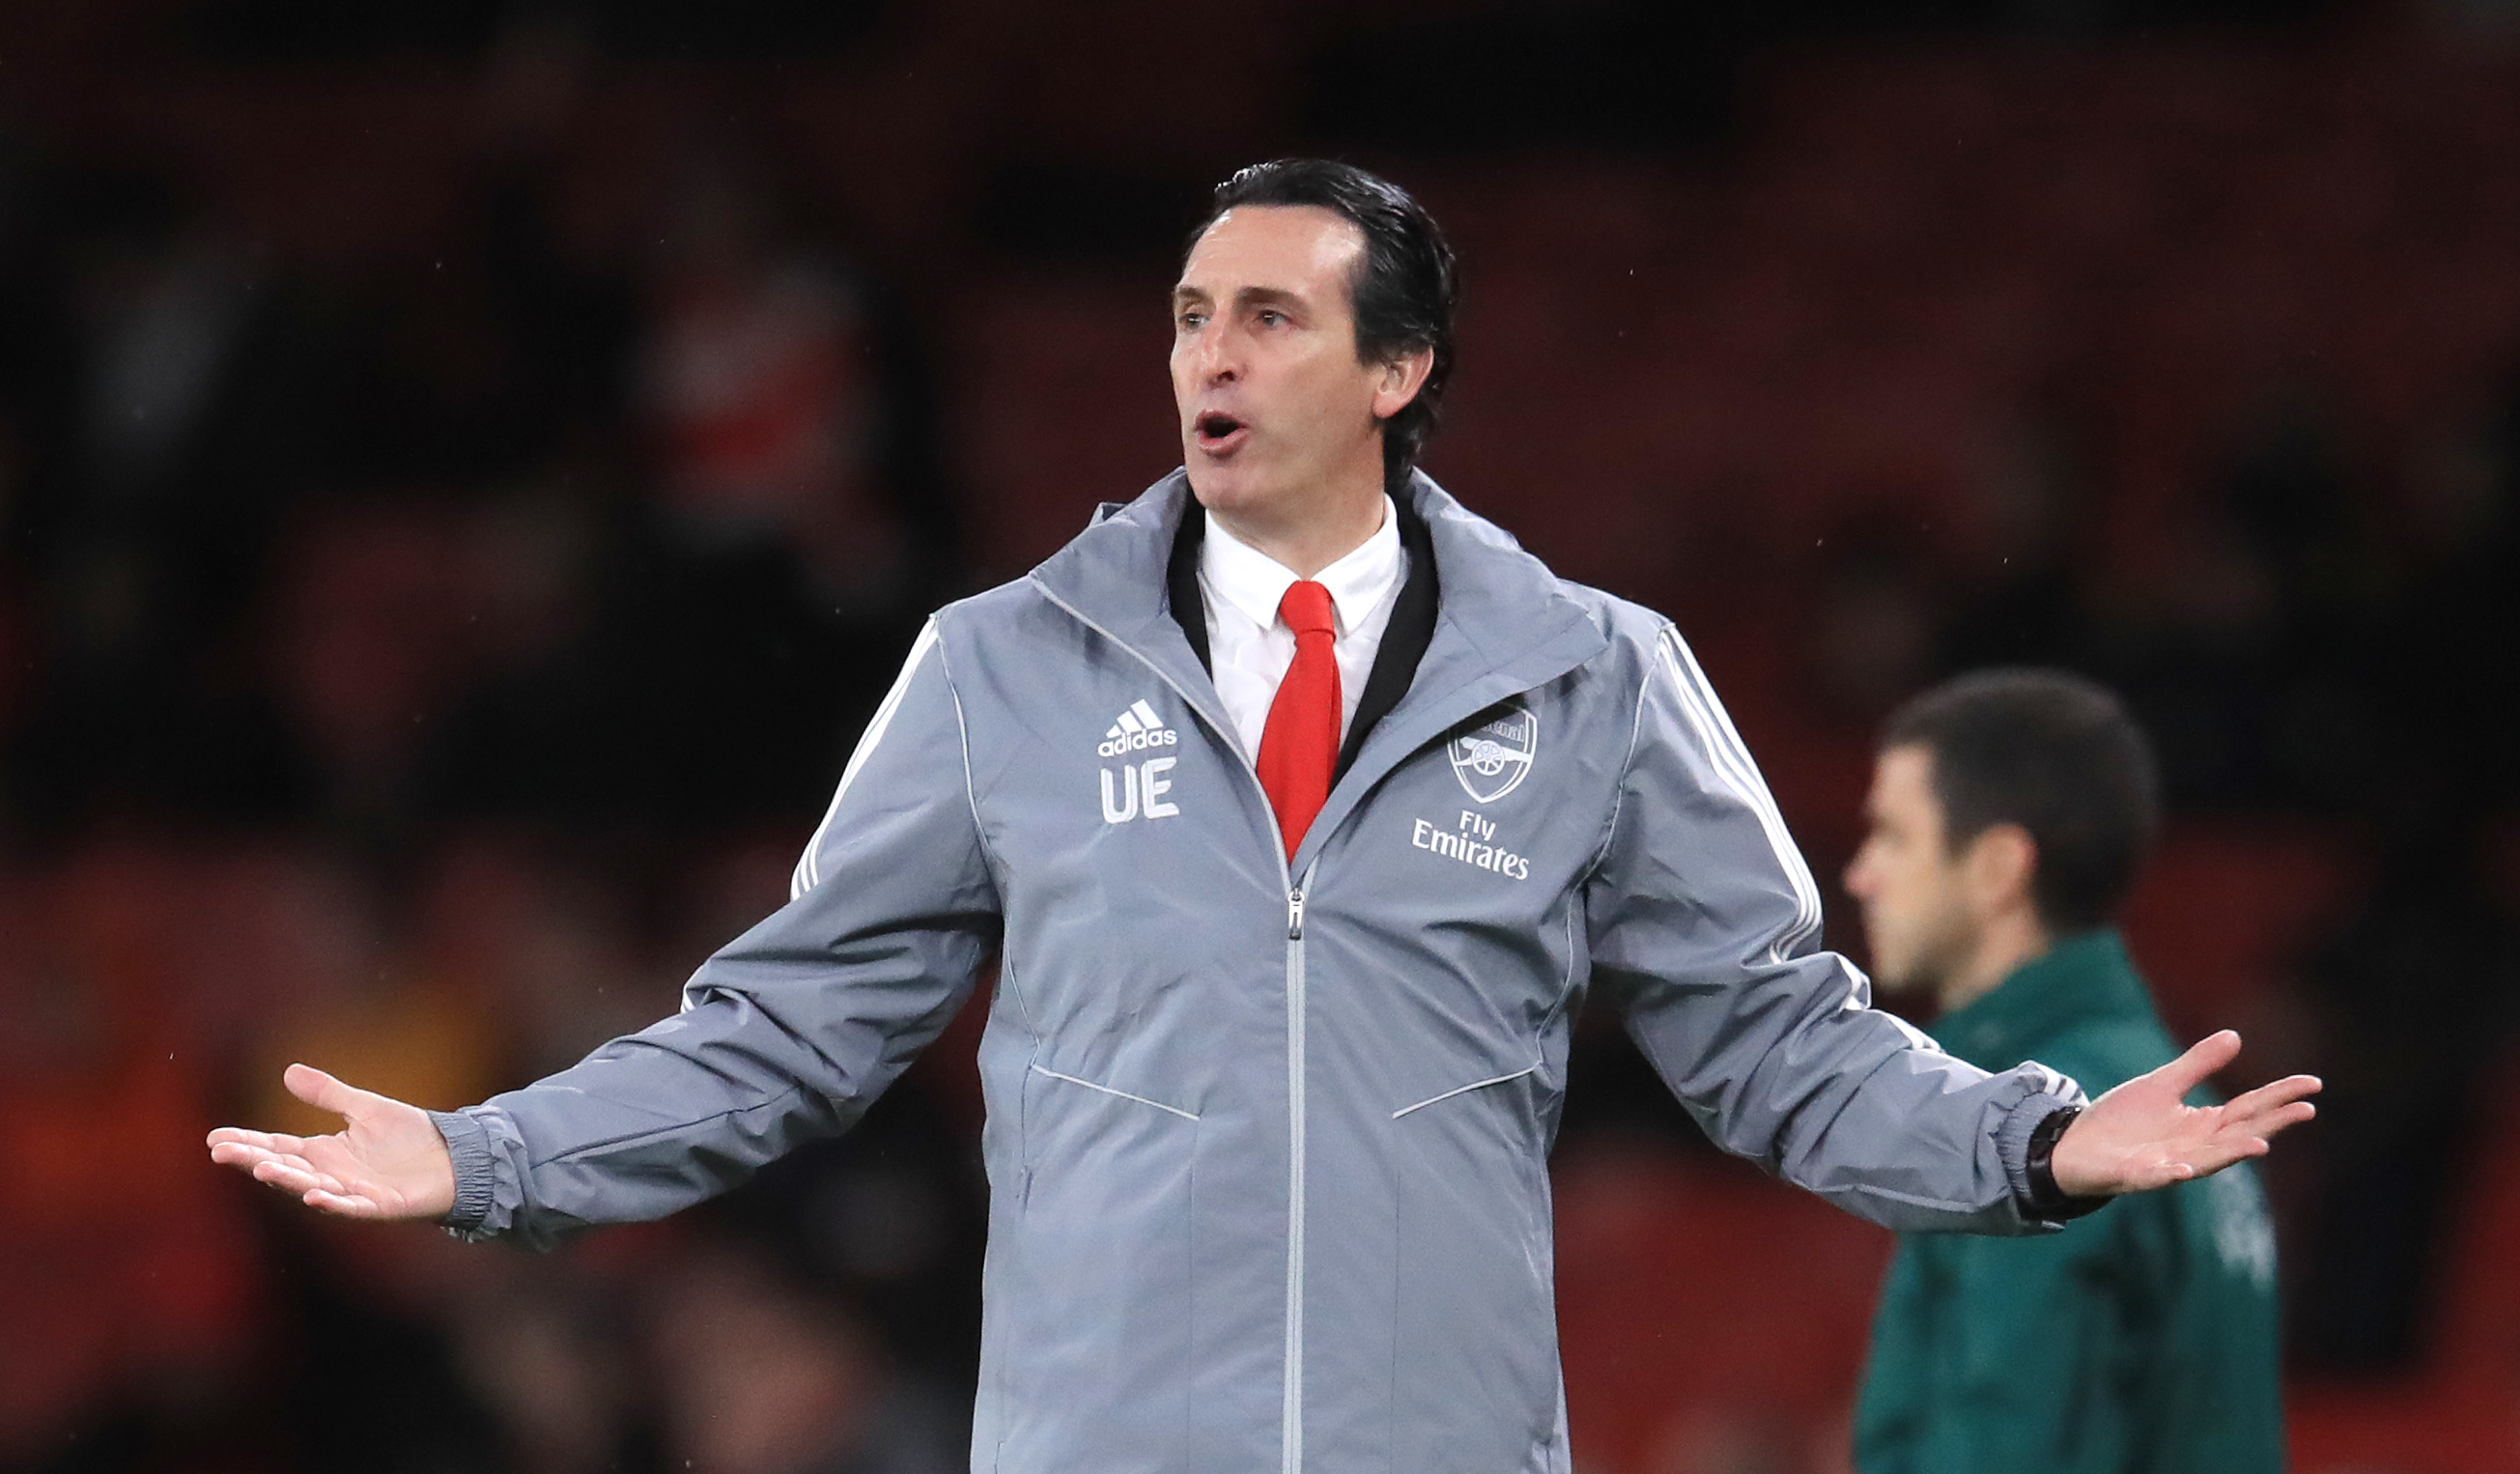 Unai Emery spent 18 months in charge at Arsenal